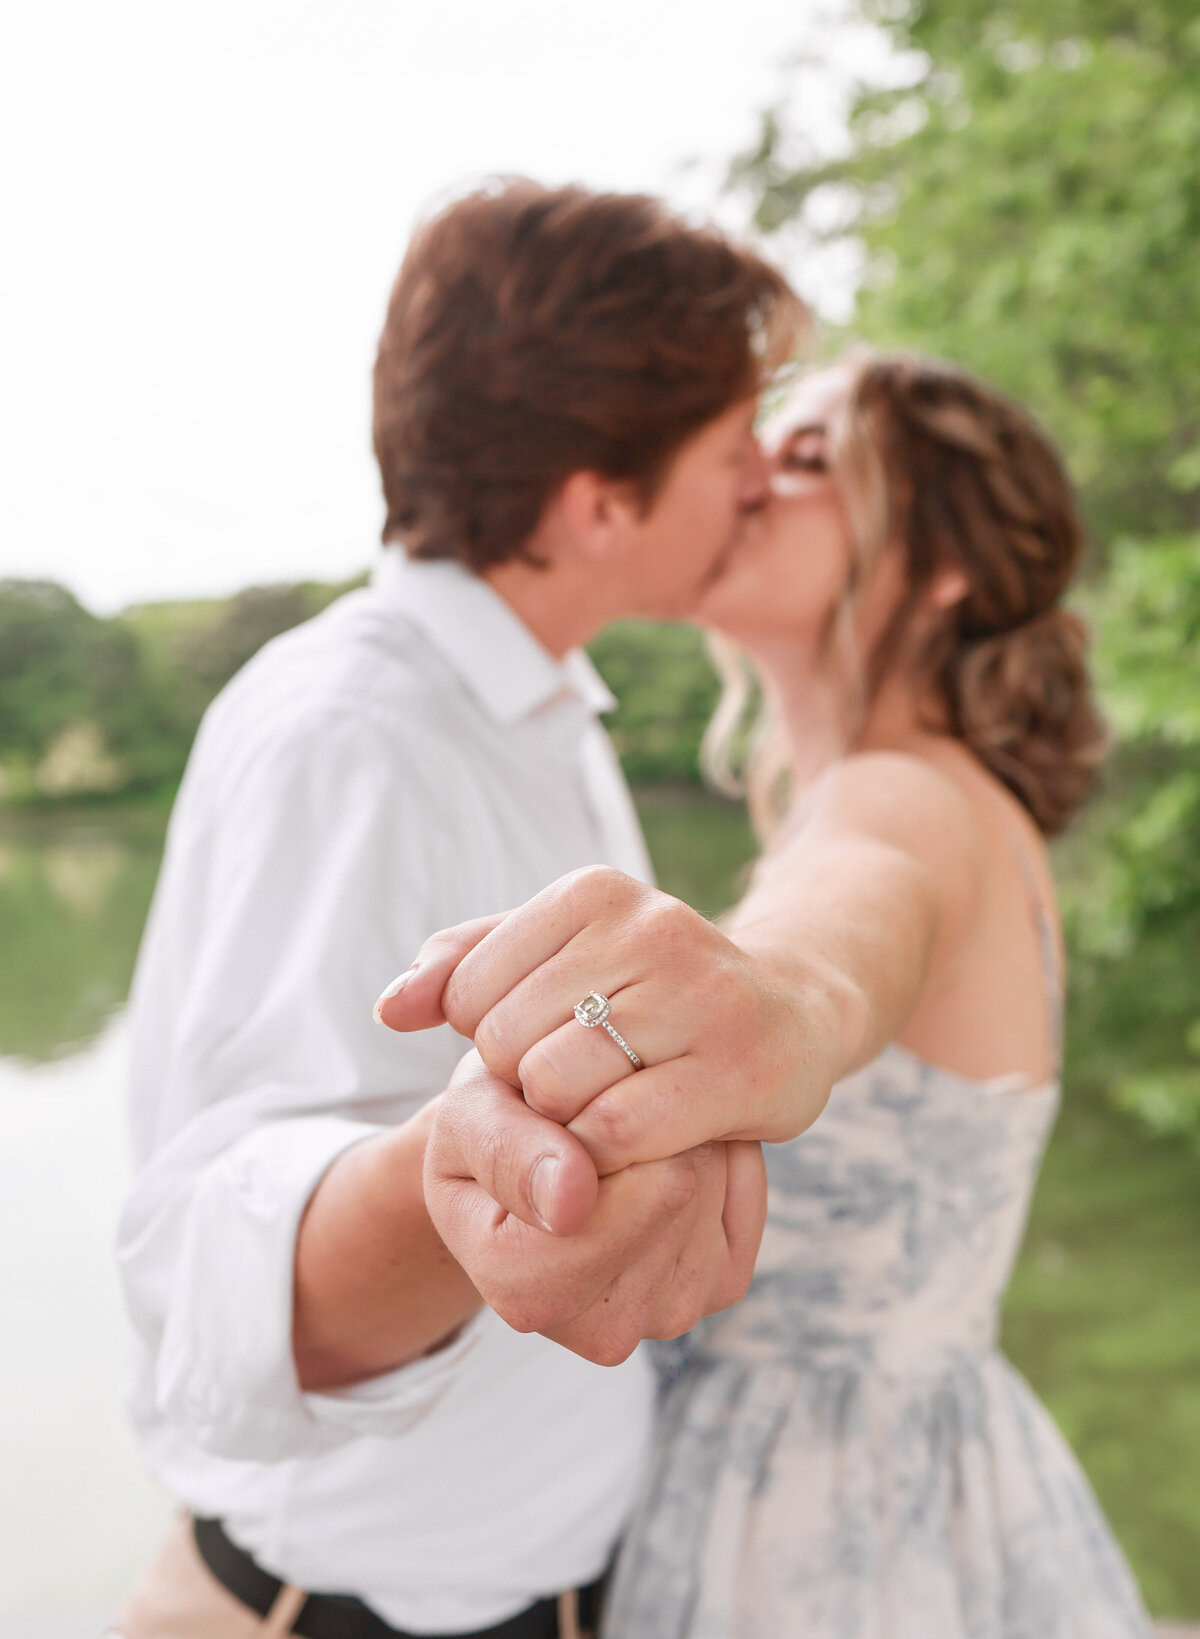 man wearing white shirt and woman wearing blue and white floral dress kissing and holding hands out showing off diamond engagement ring